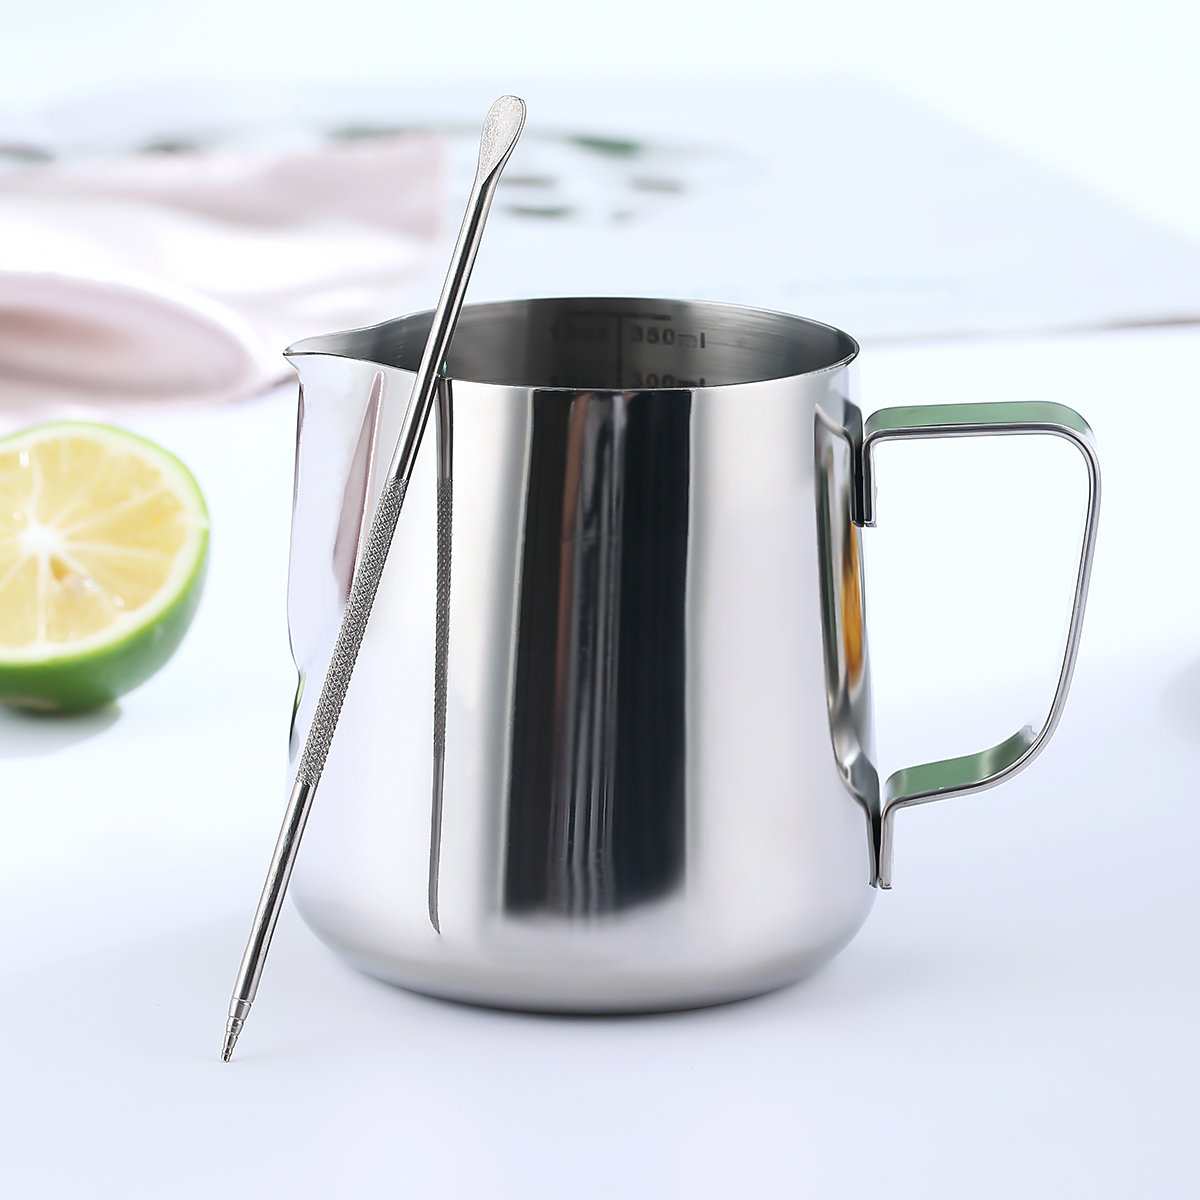 Ozeri Deluxe Milk Frother and 12 oz Frothing Pitcher in Stainless Steel,  with Extra Whisk Attachment 